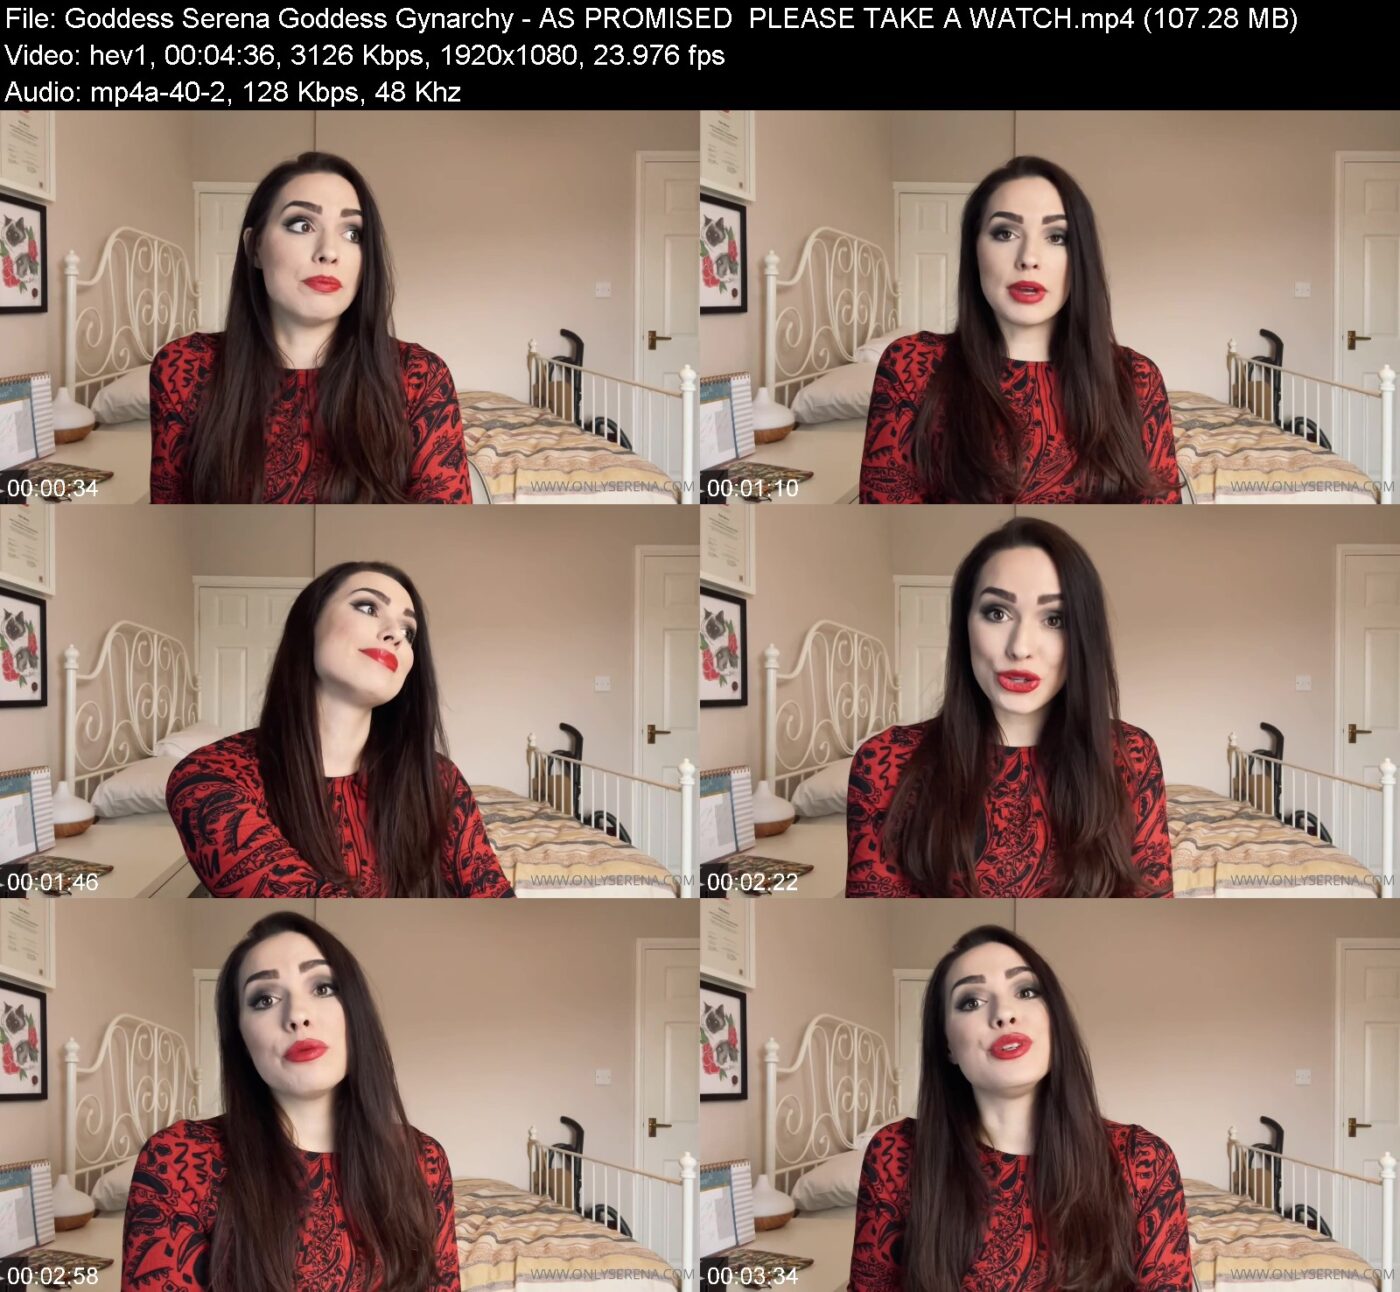 Actress: Goddess Serena Goddess Gynarchy. Title and Studio: AS PROMISED  PLEASE TAKE A WATCH